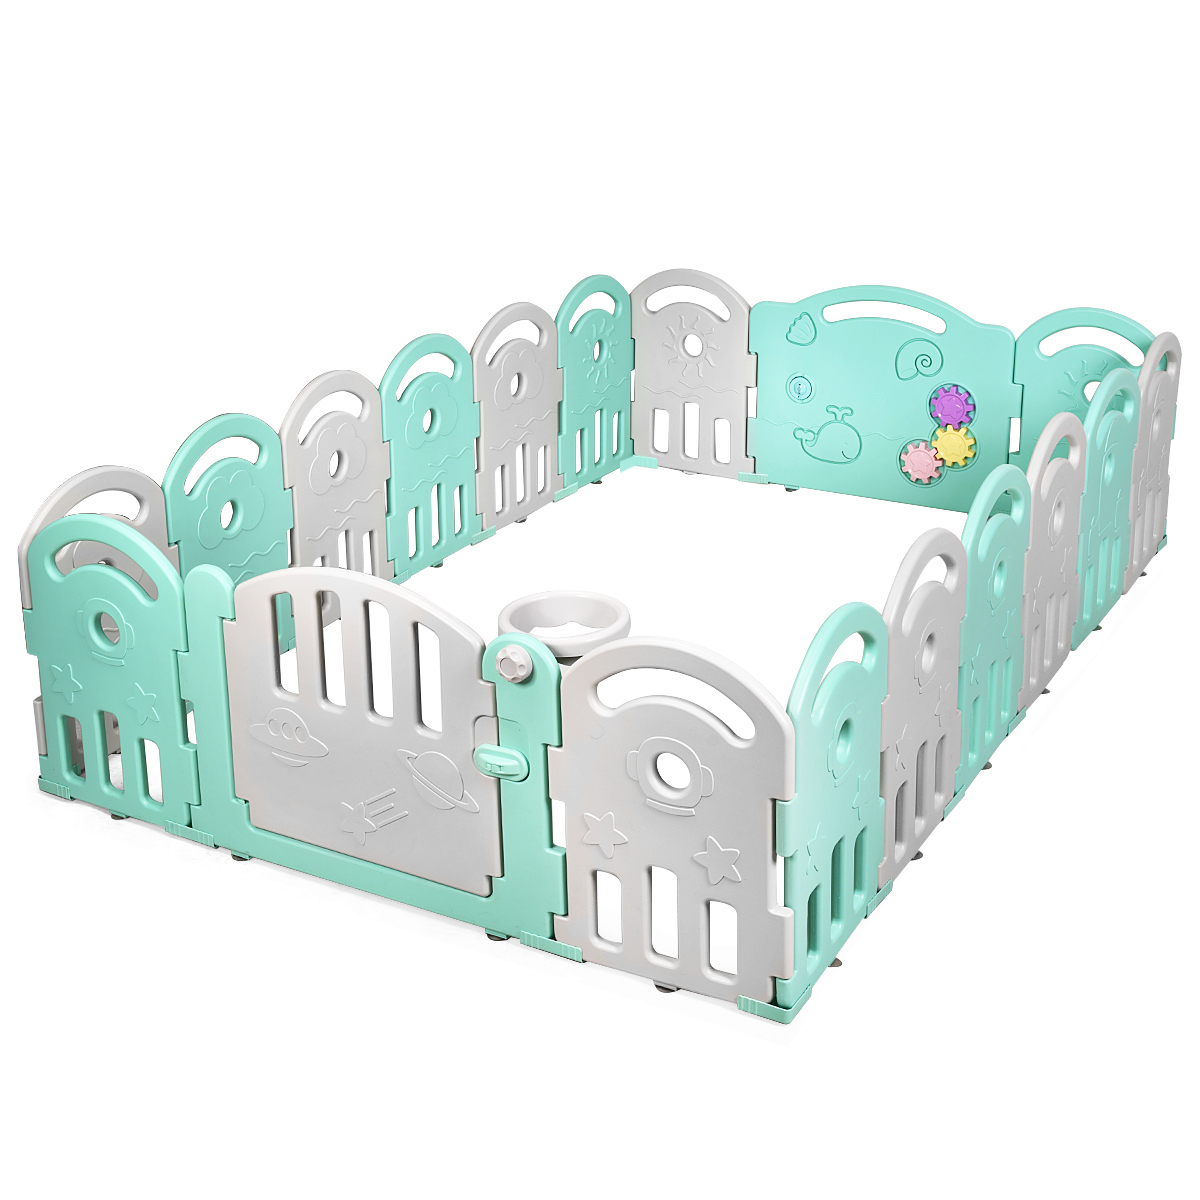 Topbuy 18-Panel Baby Playpen Kids Safety Yard Activity Center with Educational Toys Pin